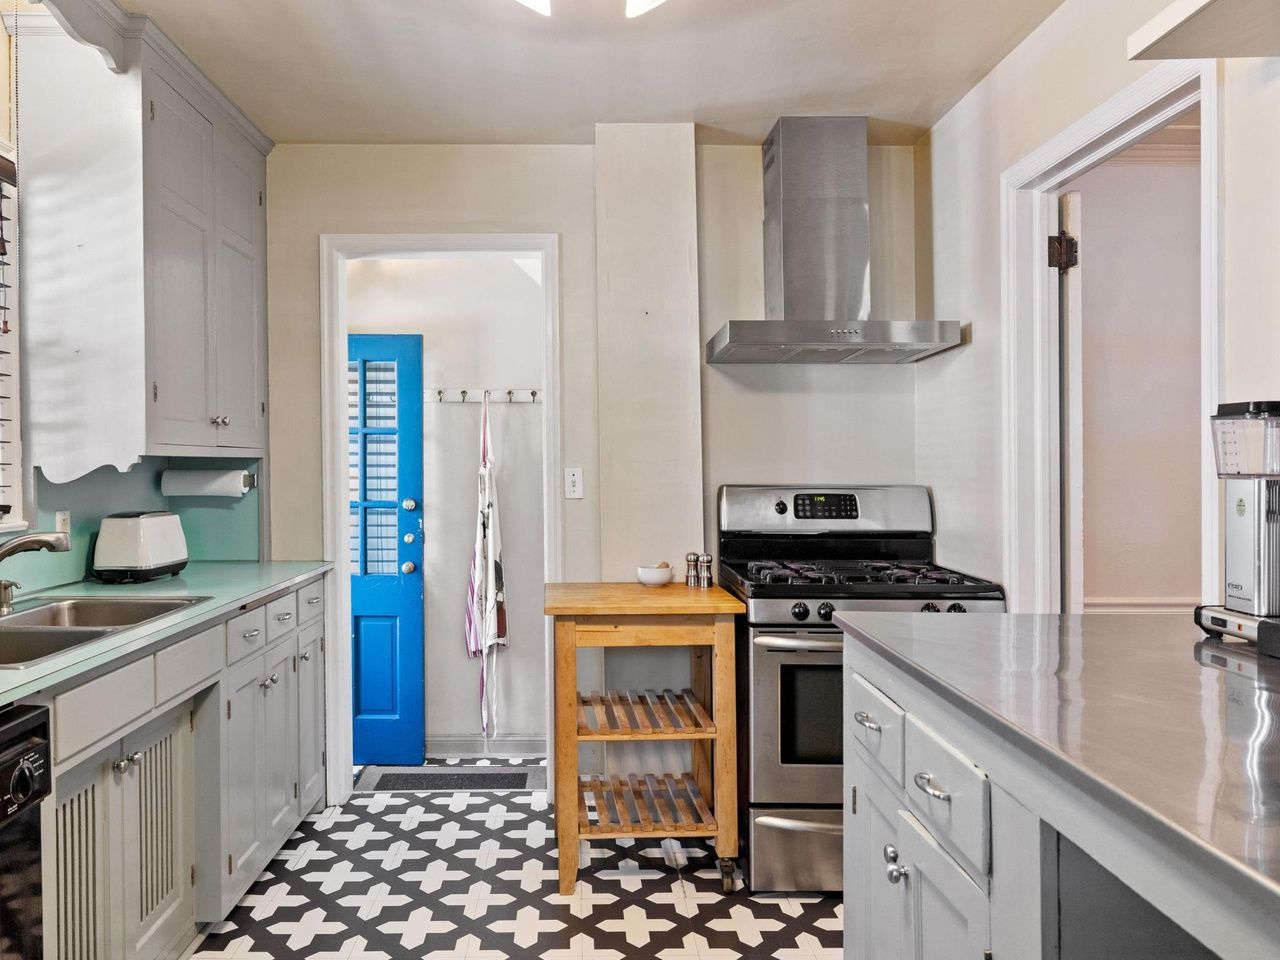 kichen with patterned floors and stainless appliances